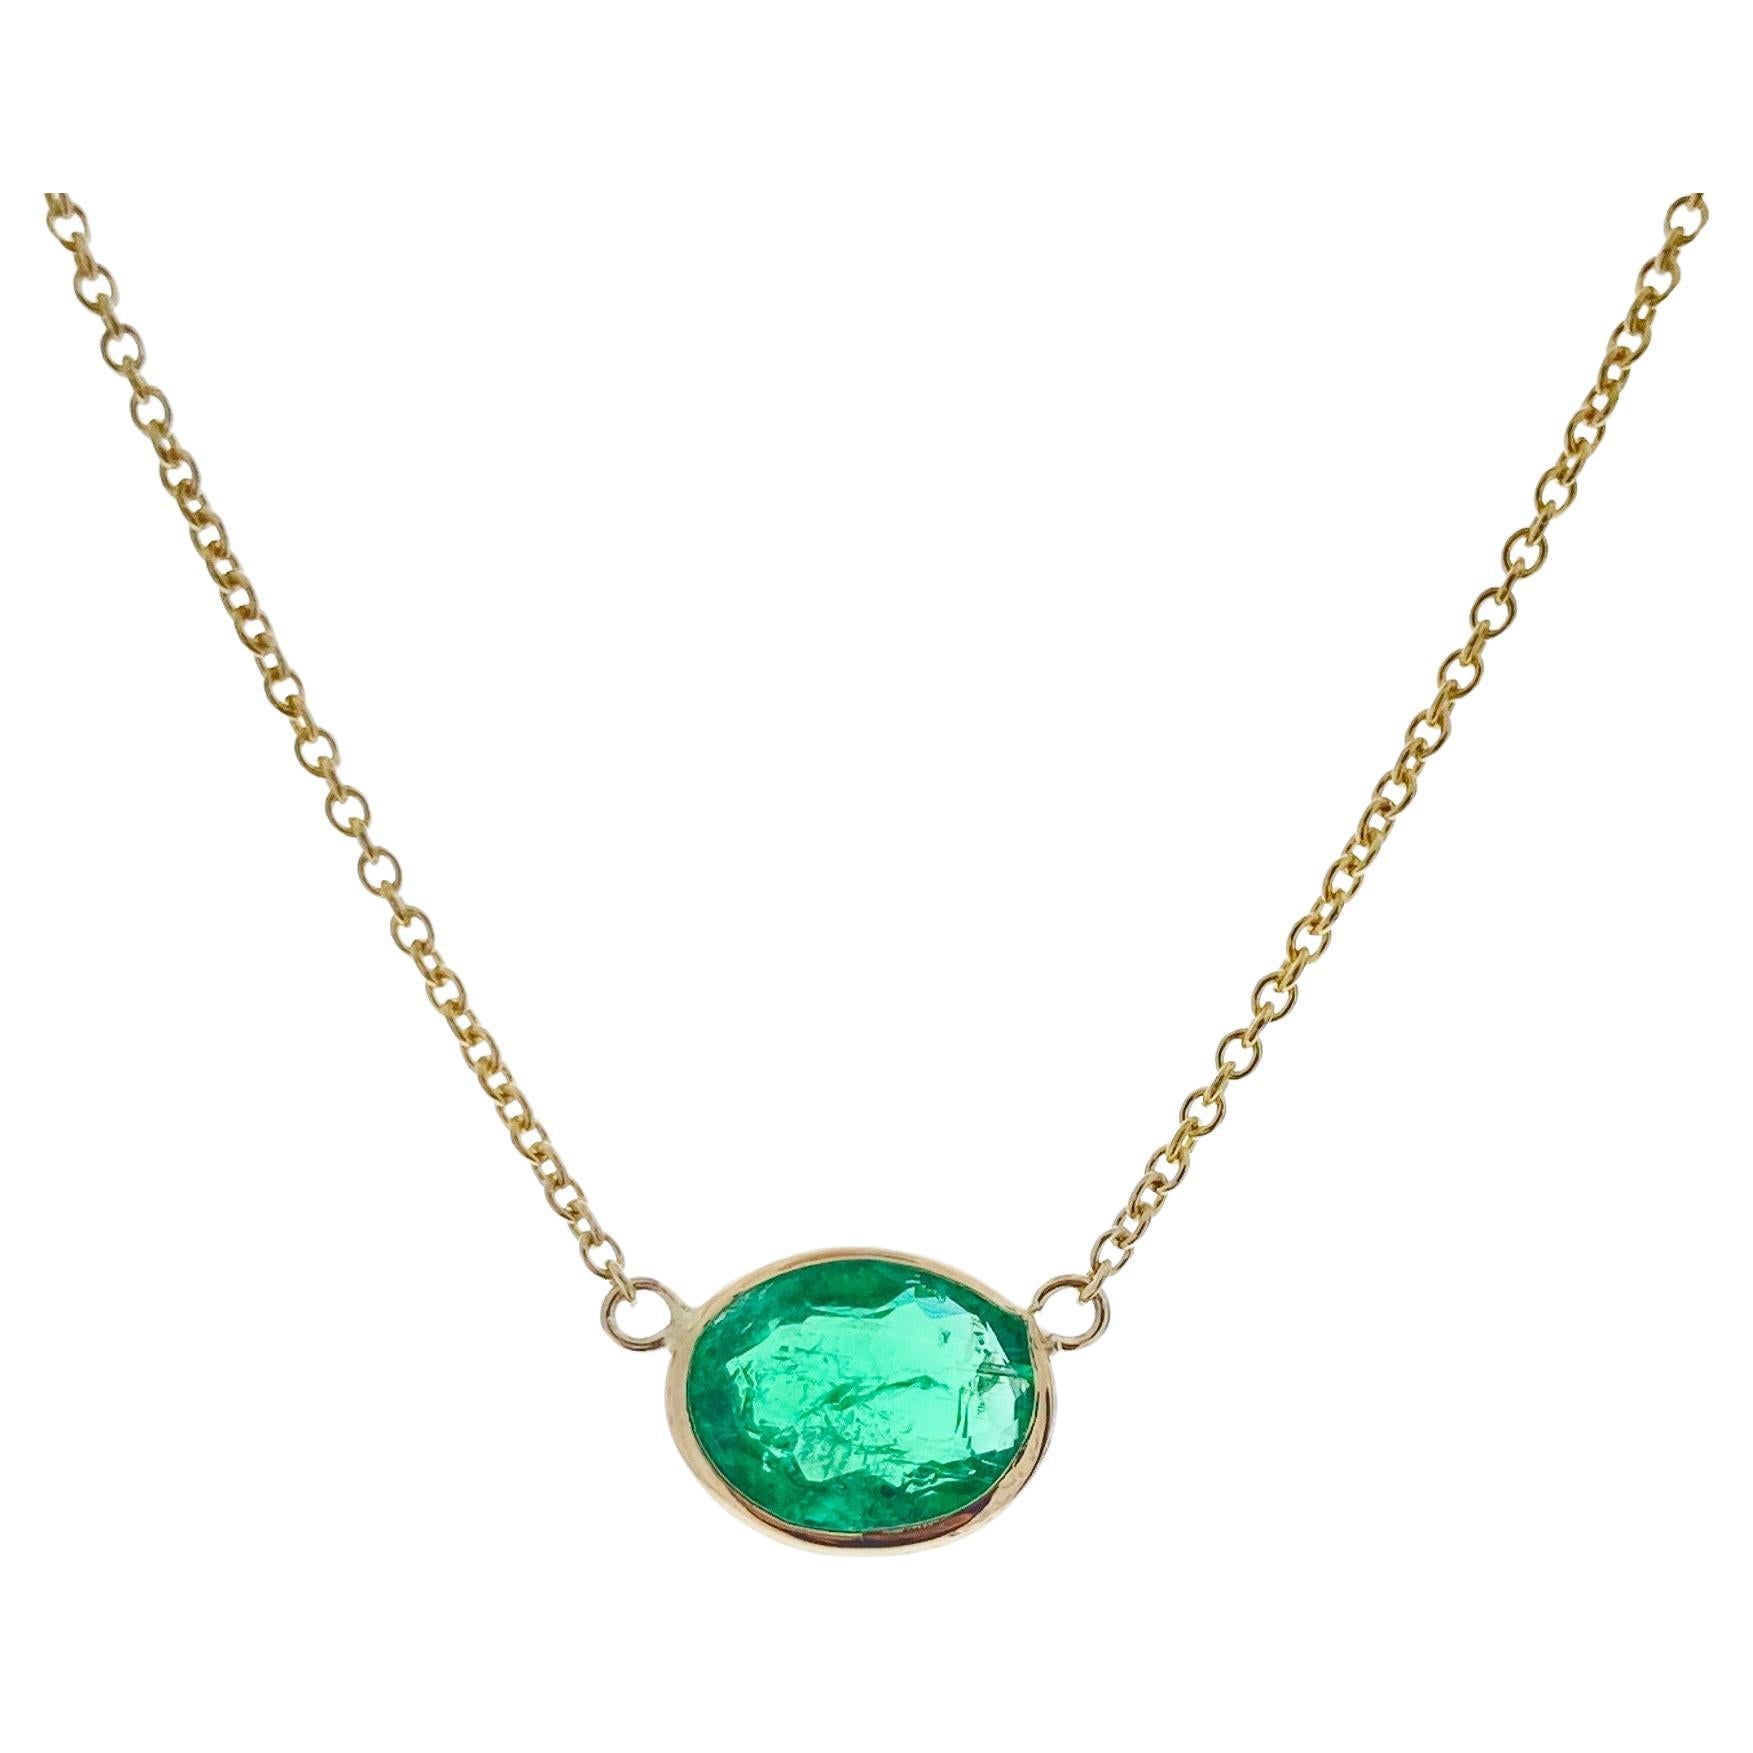 1.96 Carat Green Emerald Oval Cut Fashion Necklaces In 14K Yellow Gold